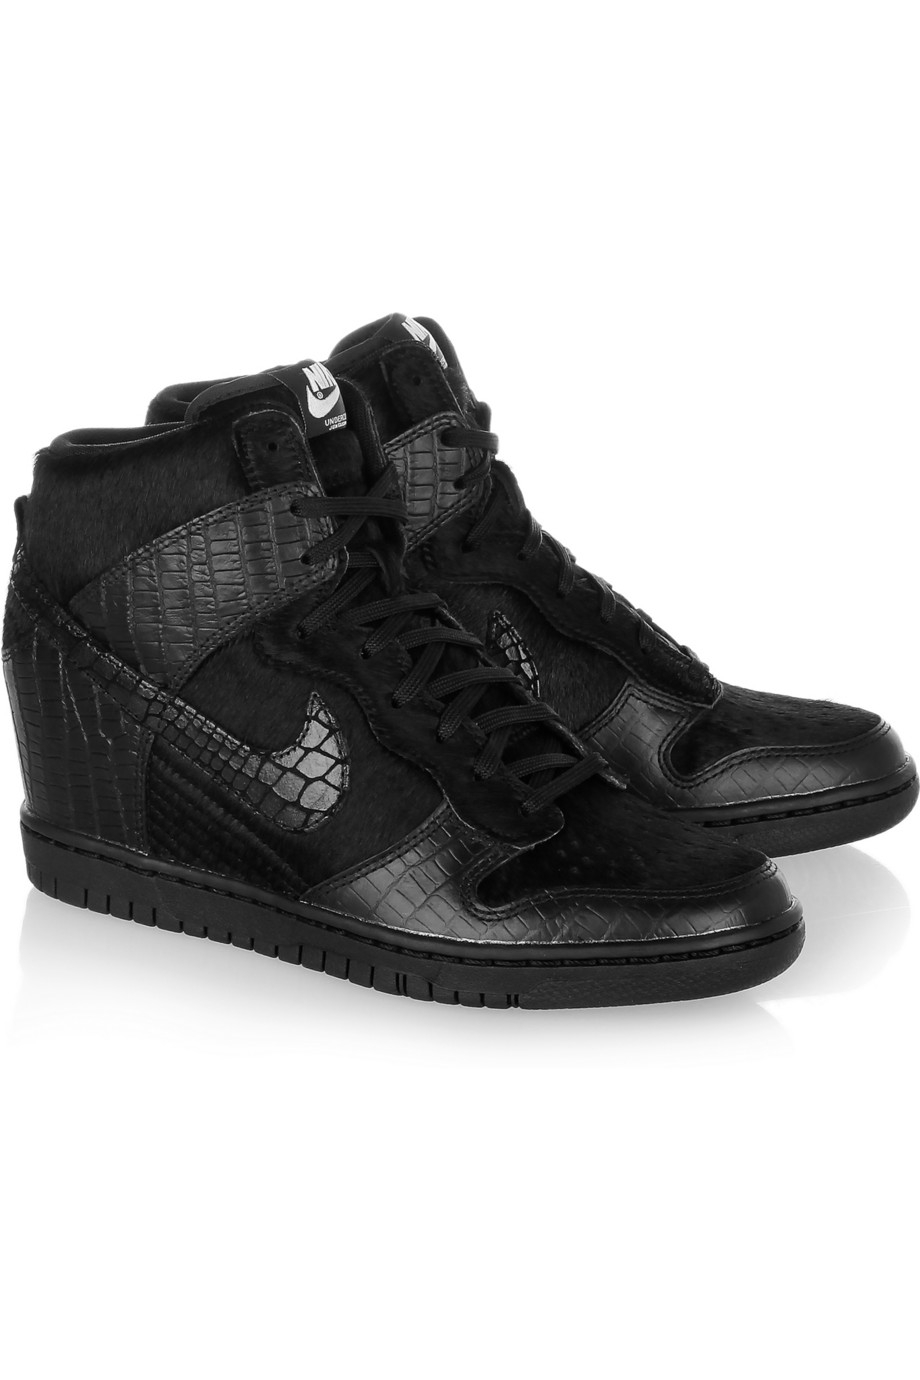 Nike Undercover Dunk Sky Hi Leather and Faux Calf Hair Sneakers in Black |  Lyst